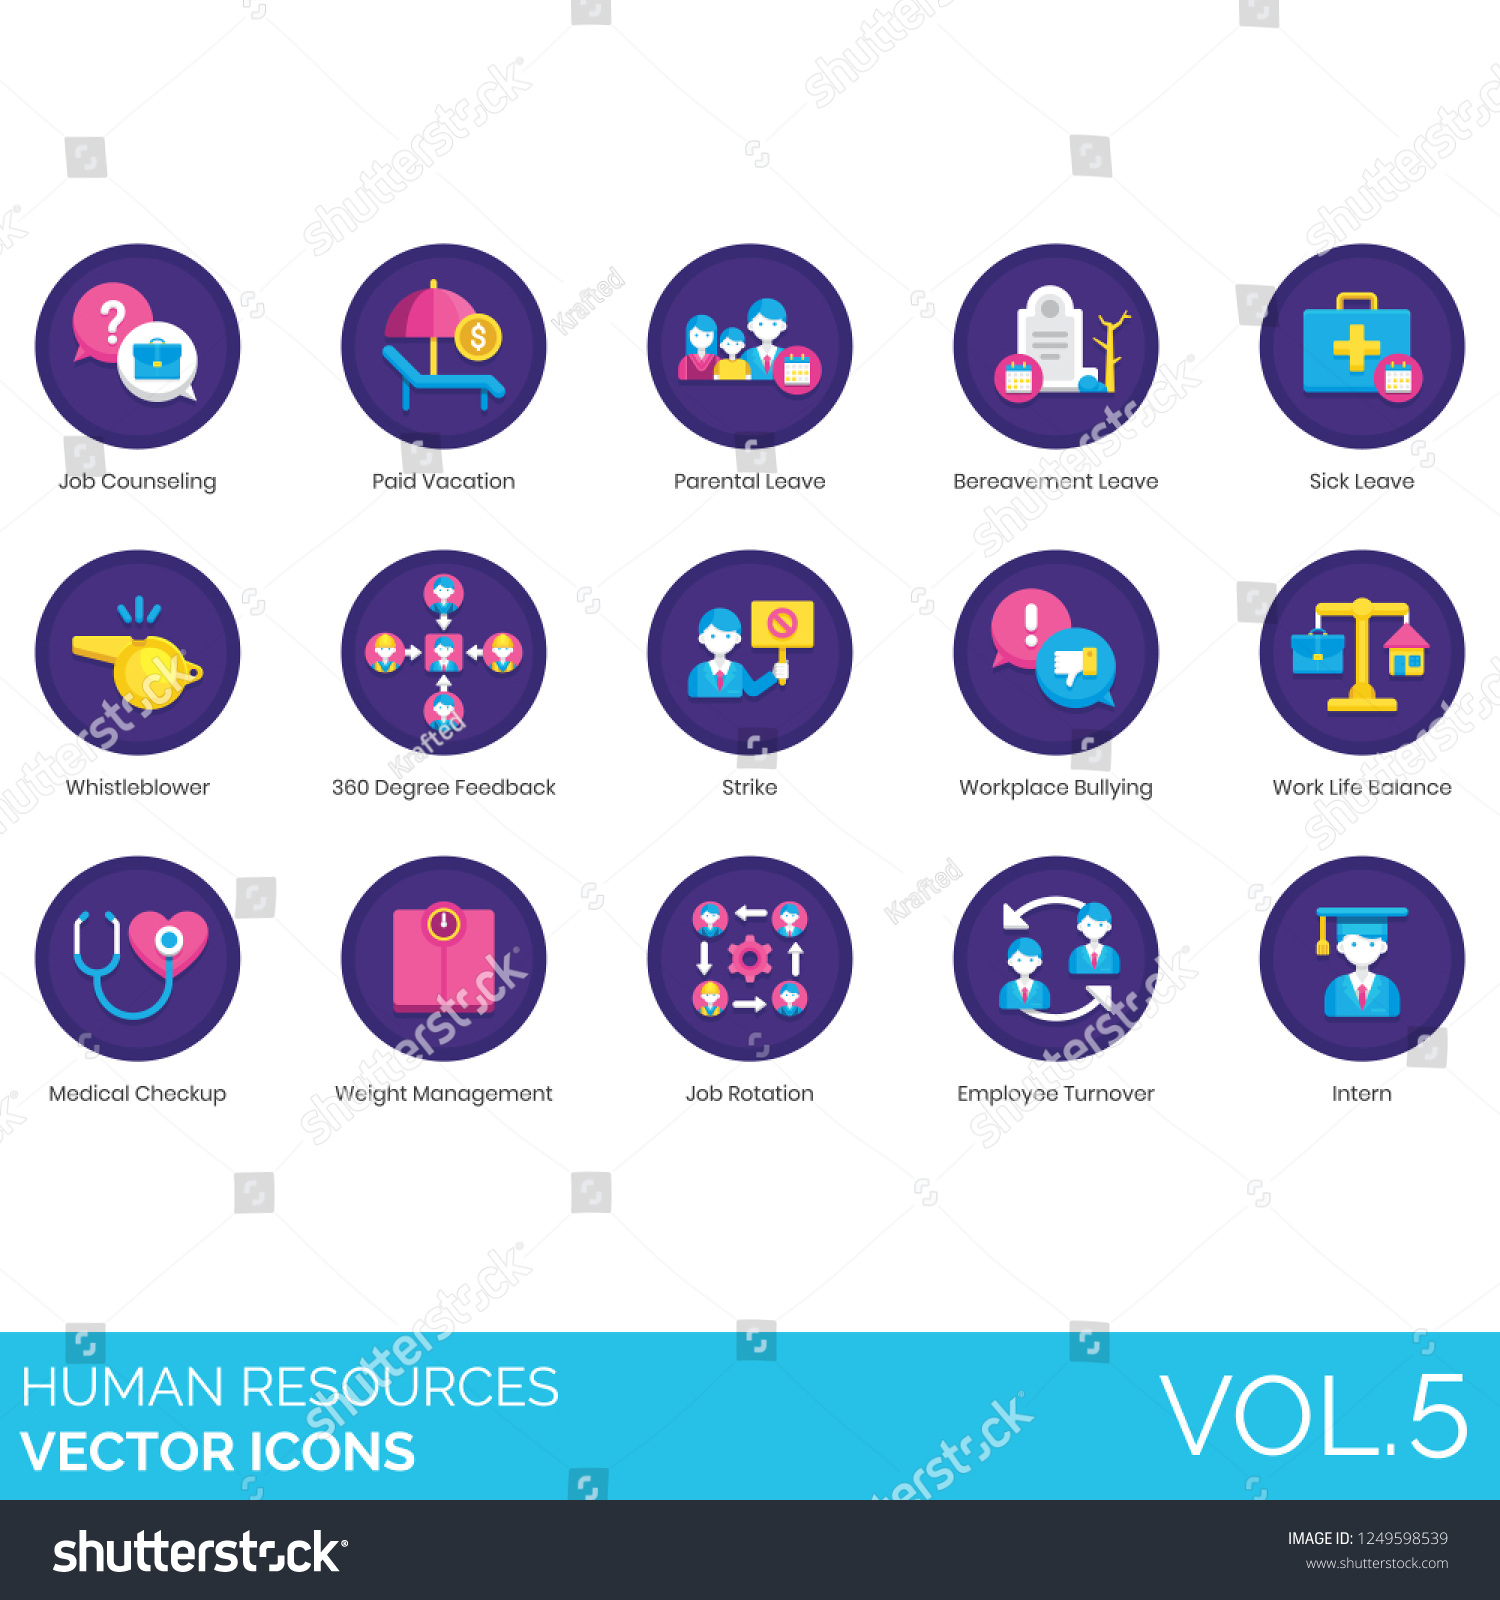 SVG of Human resources icons including counseling, vacation, parental leave, bereavement, sick, whistleblower, feedback, strike, bullying, work life balance, medical checkup, job rotation, turnover, intern. svg